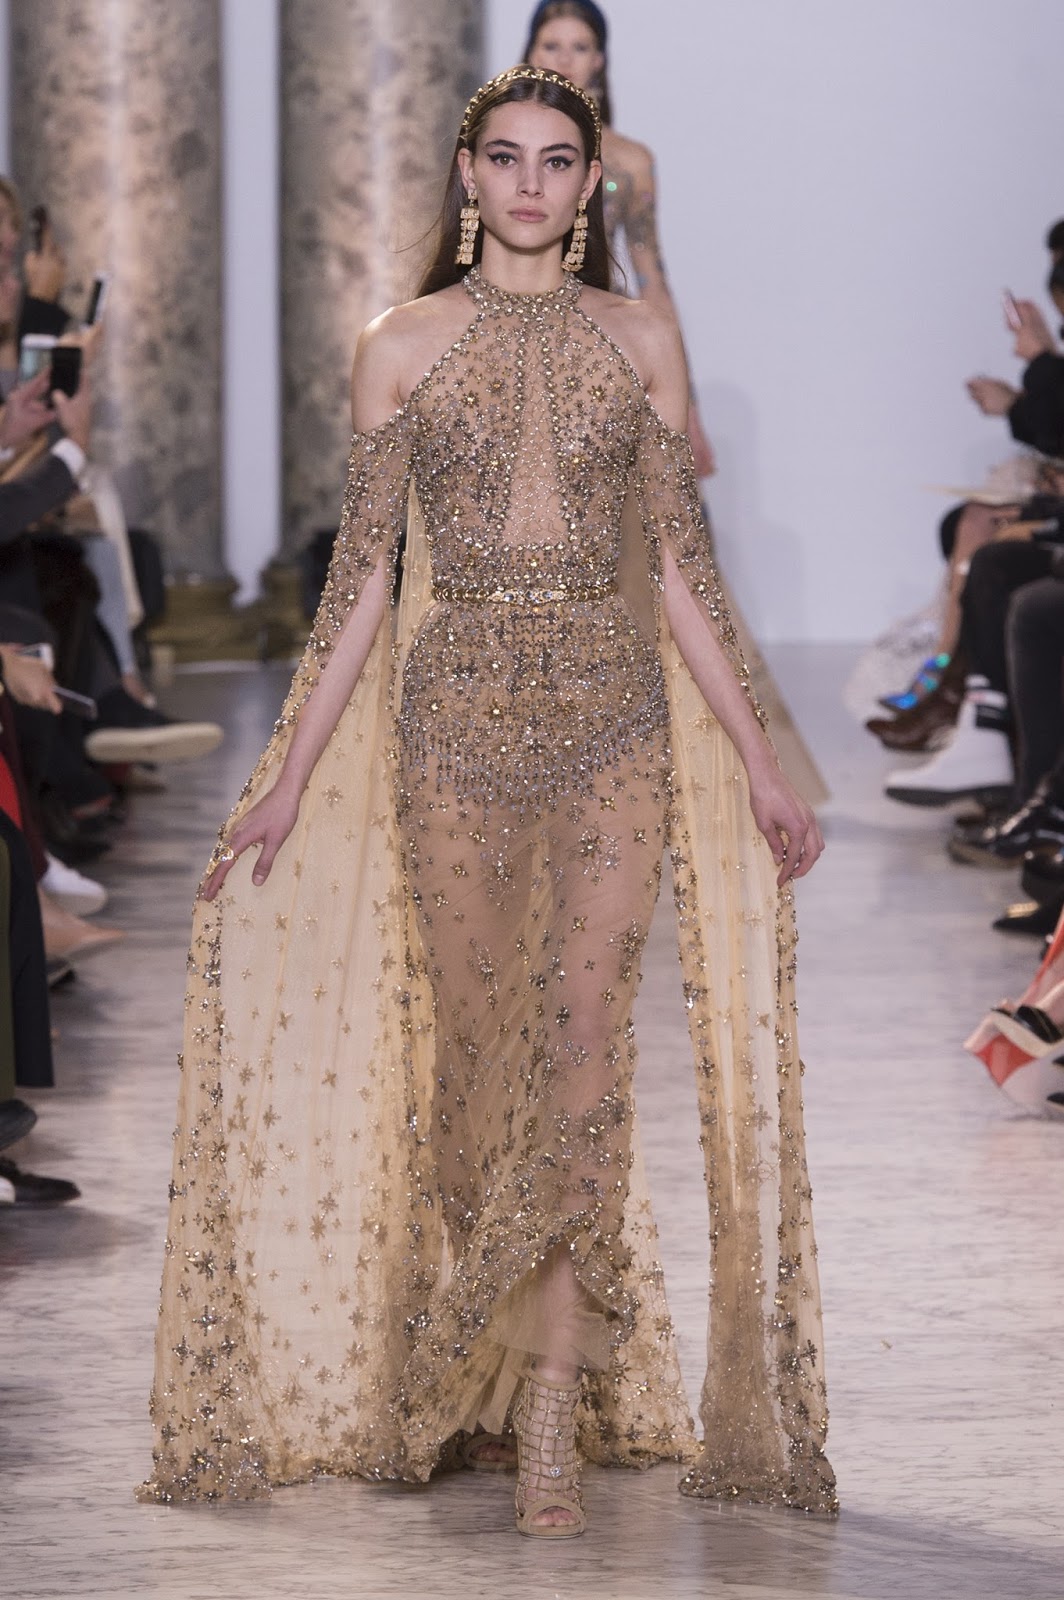 Simply Stunning: Elie Saab Haute Couture February 7, 2017 | ZsaZsa ...